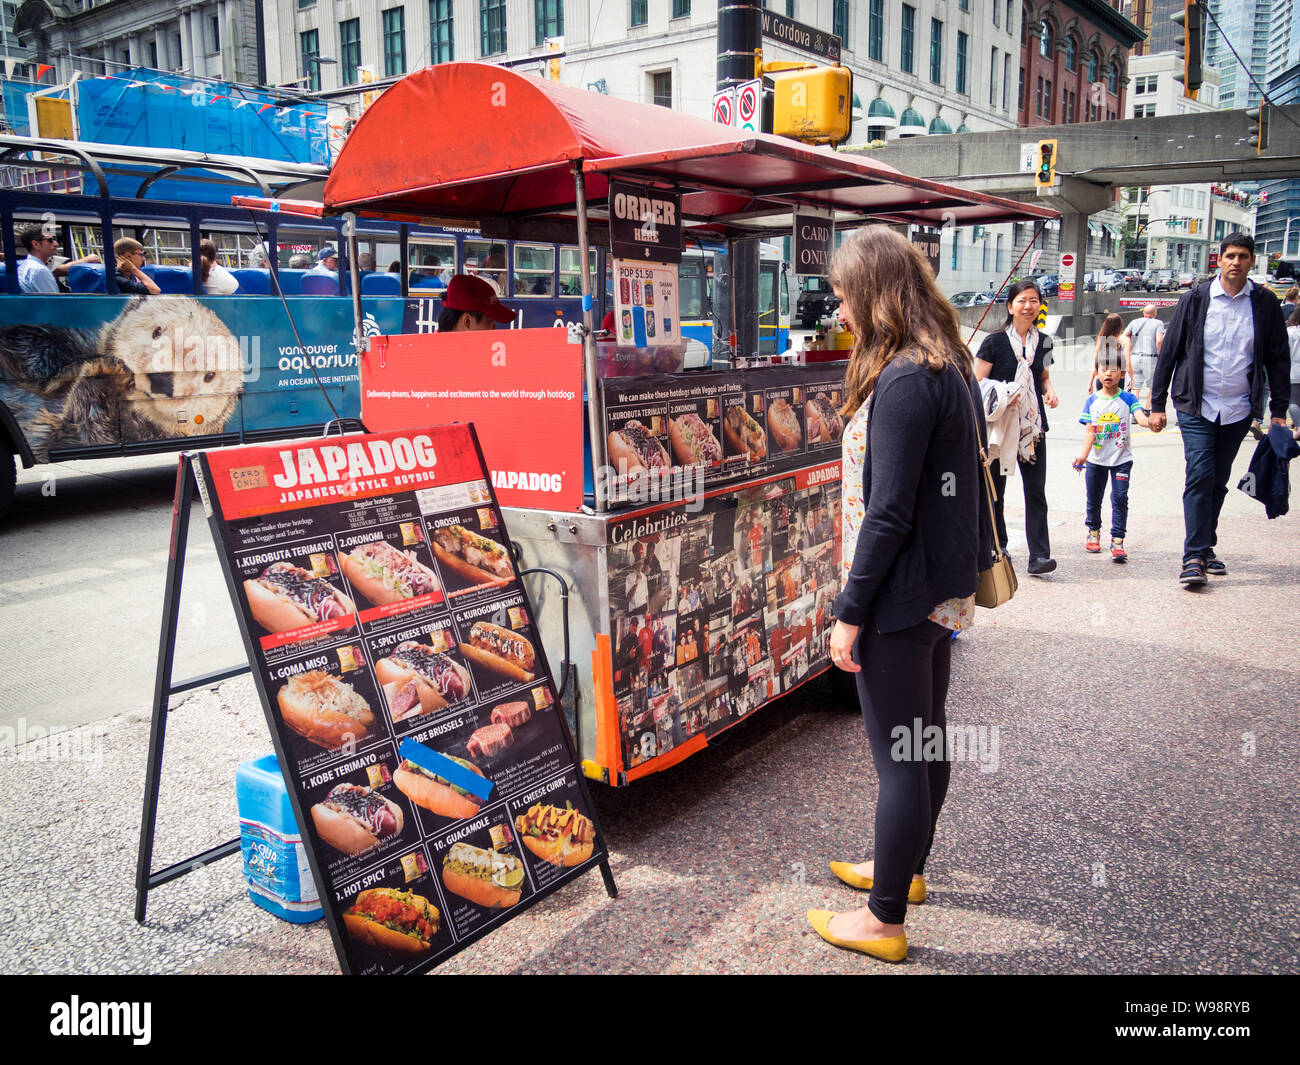 A girl looks at the menu of a Japadog hot dog trailer stand on West Cordova Street in Vancouver, British Columbia, Canada. Stock Photo